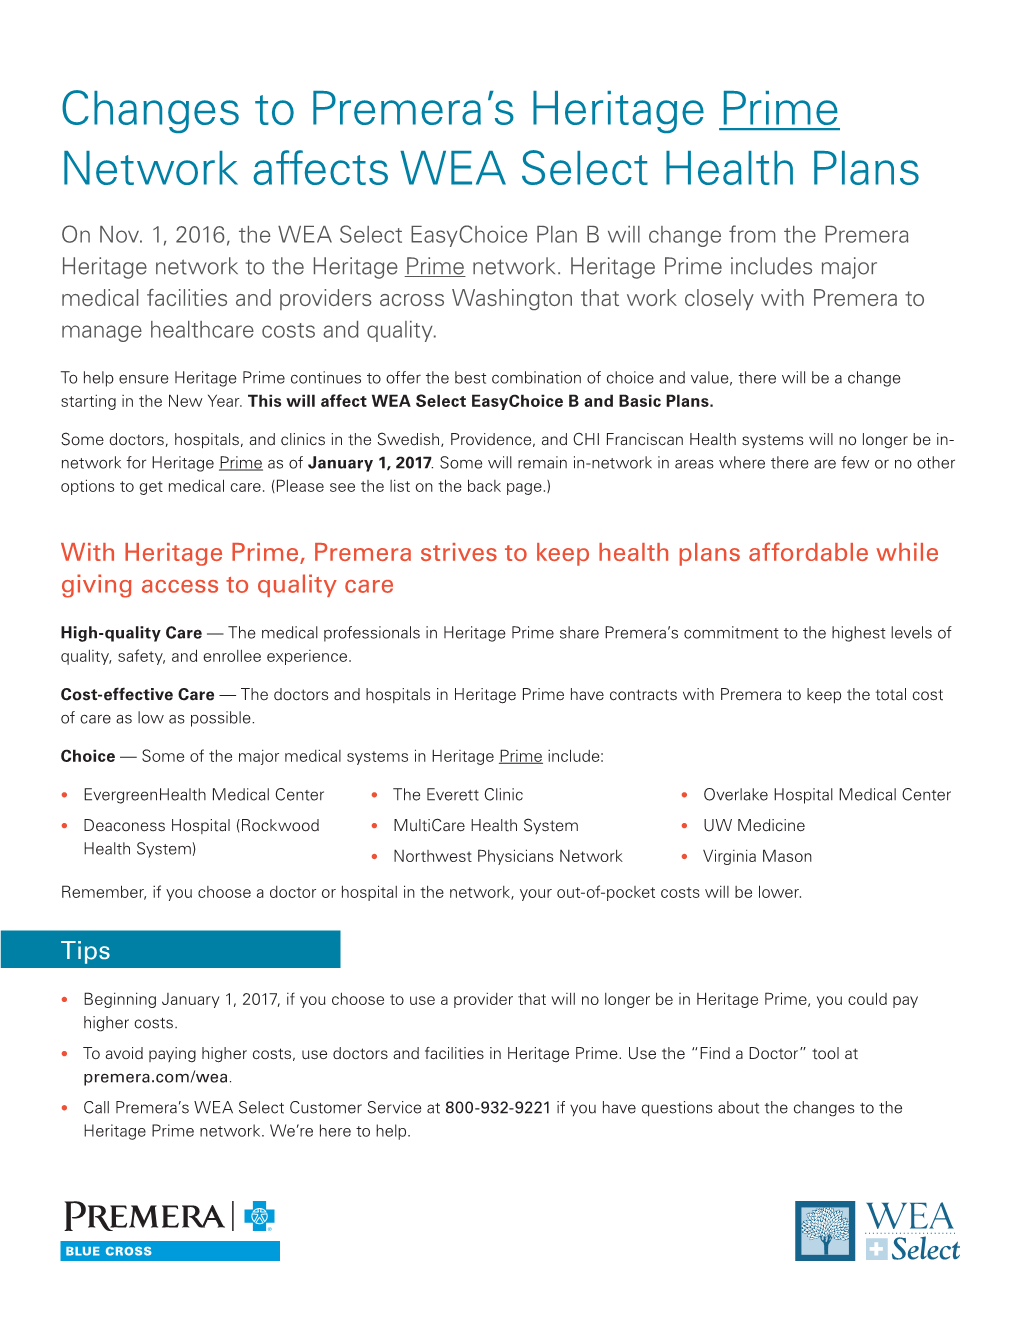 Changes to Premera's Heritage Prime Network Affects WEA Select Health